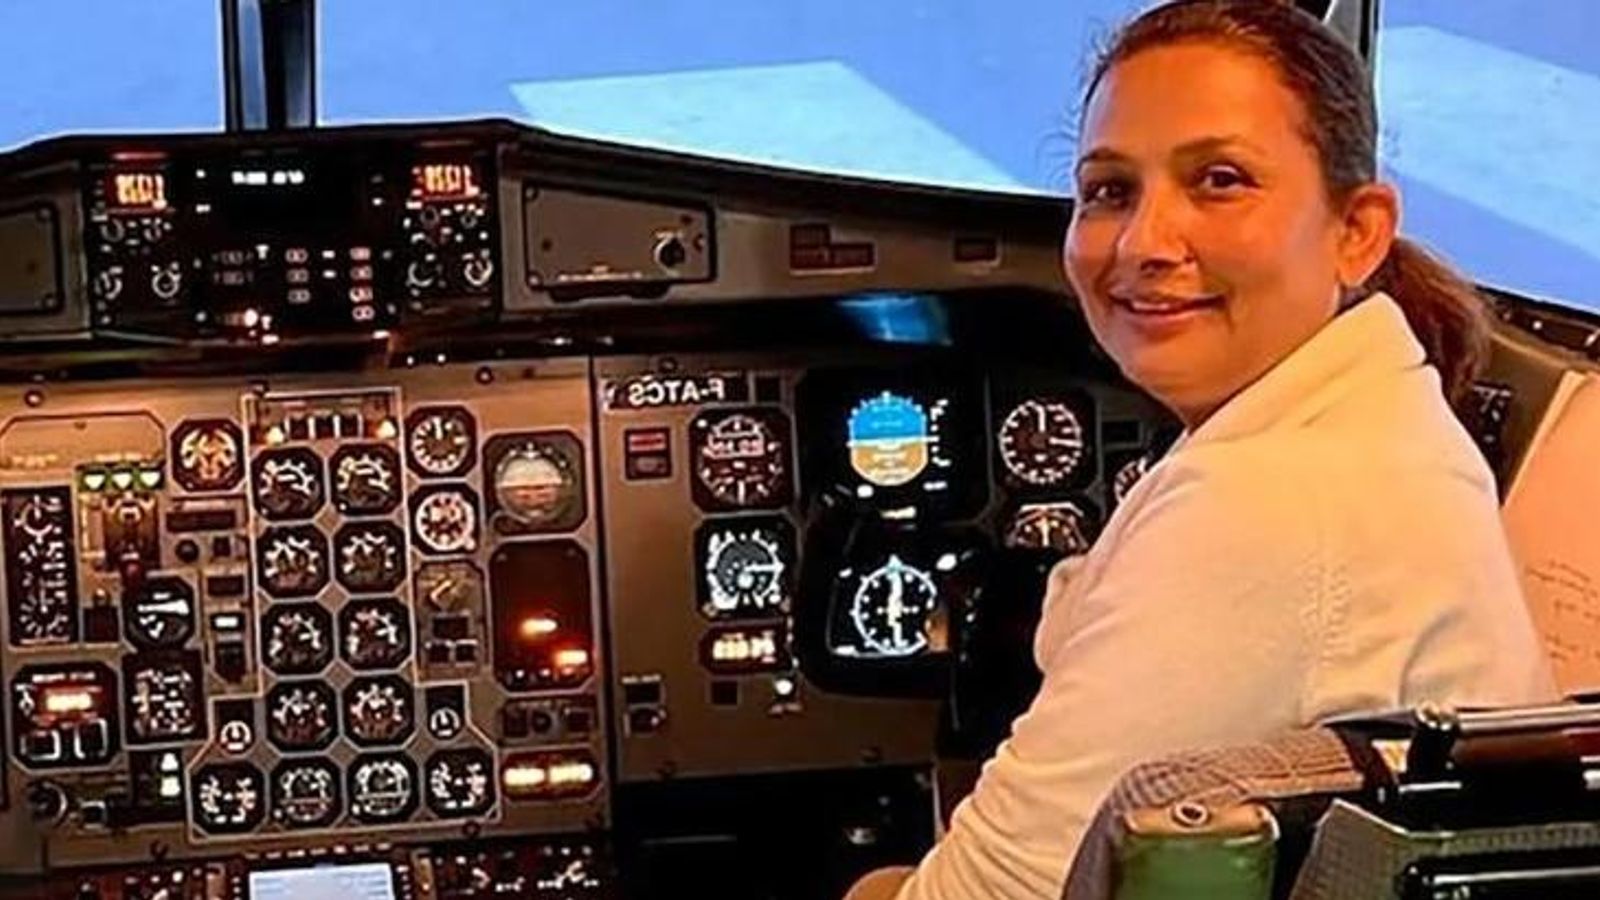 Nepal plane crash: Co-pilot's husband also died in Yeti Airlines accident 16 years ago